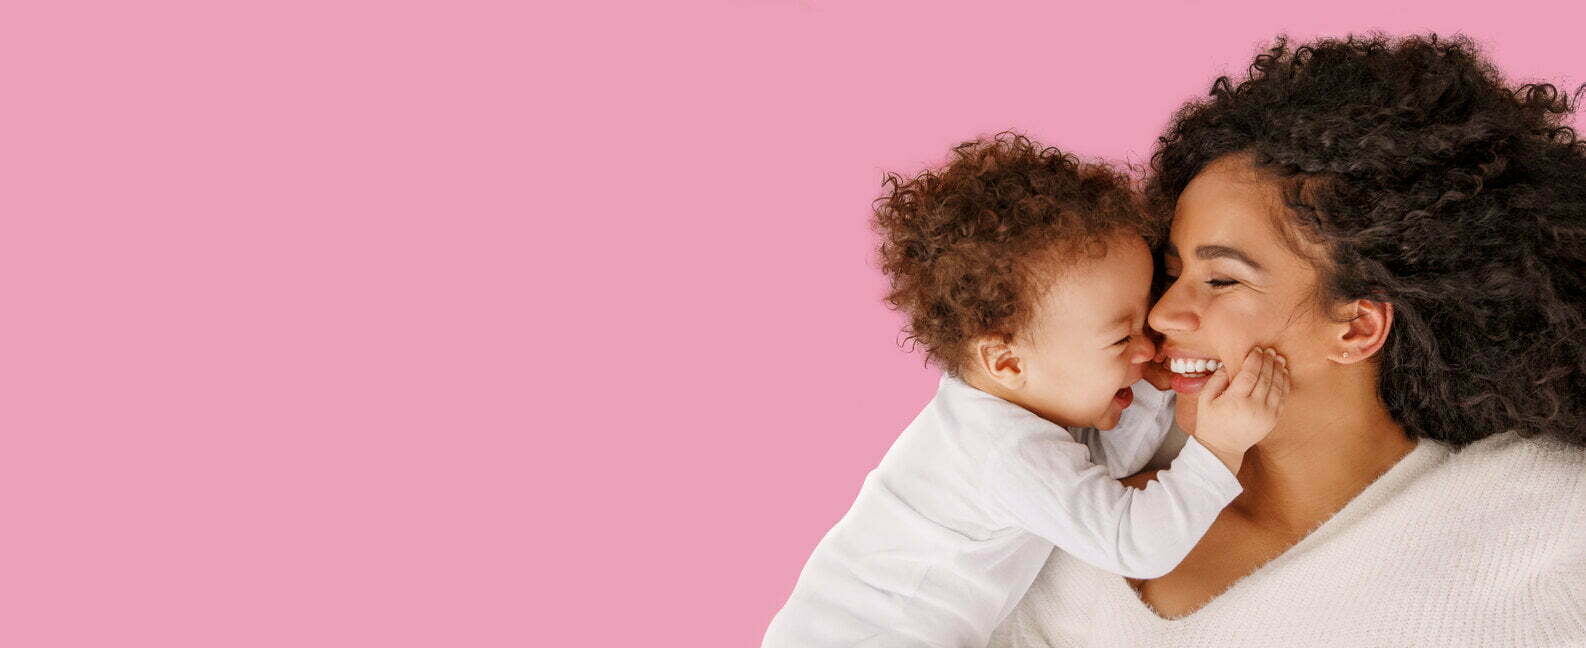 Smiling curly-haired woman with a baby grabbing her cheeks, on a pink background